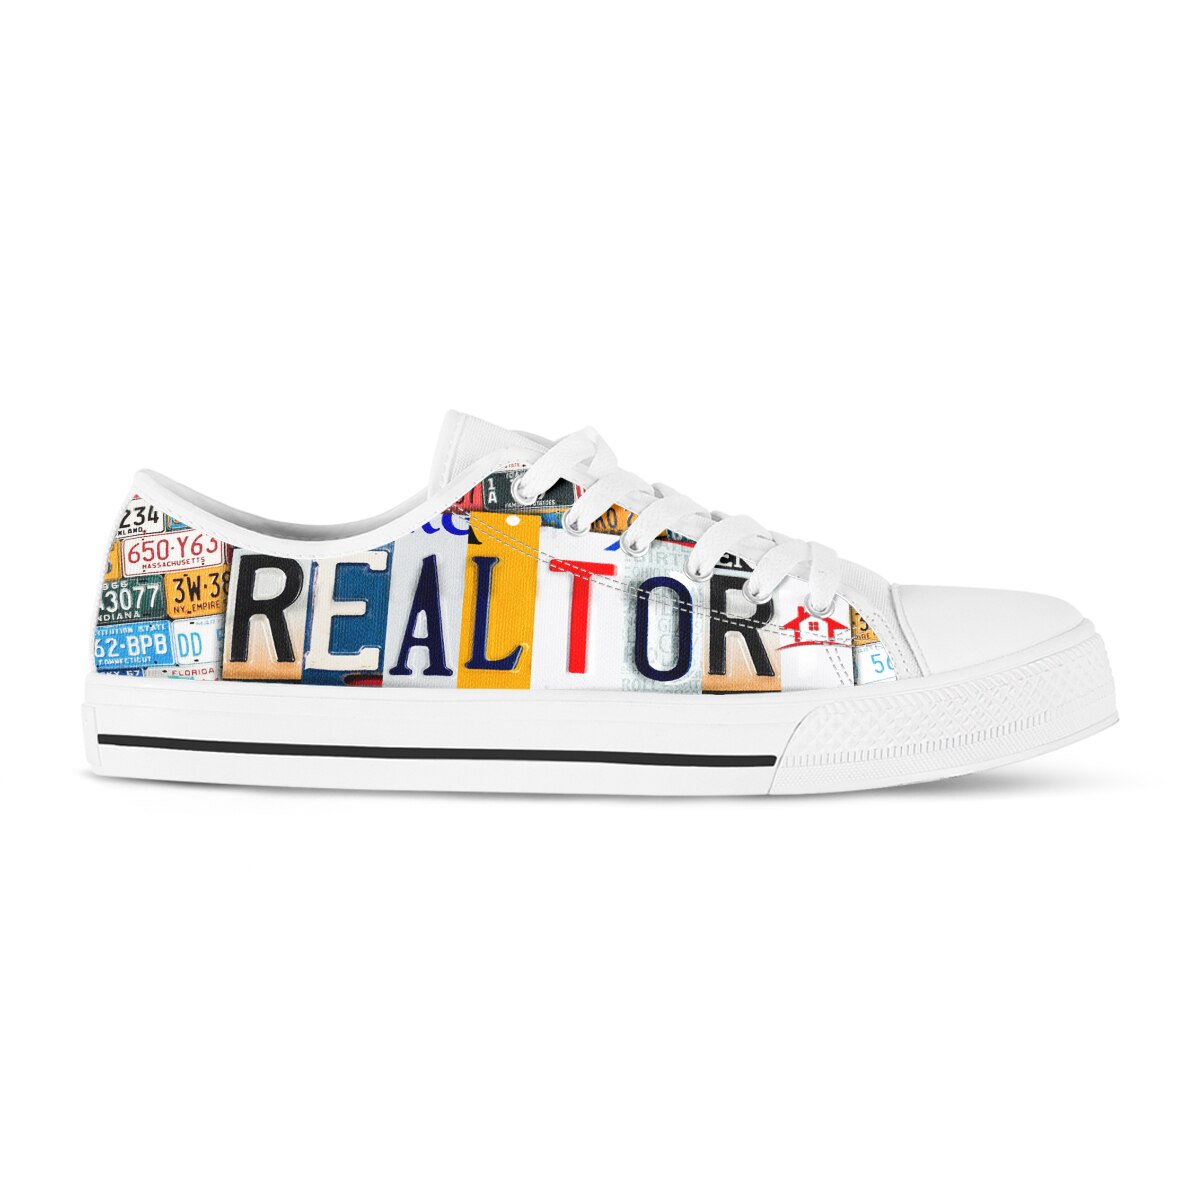 BKQU License Plate Realtor Design Ladies Shoes Casual Flats Shoes for Women Low Top Canvas Shoes for Women Brand